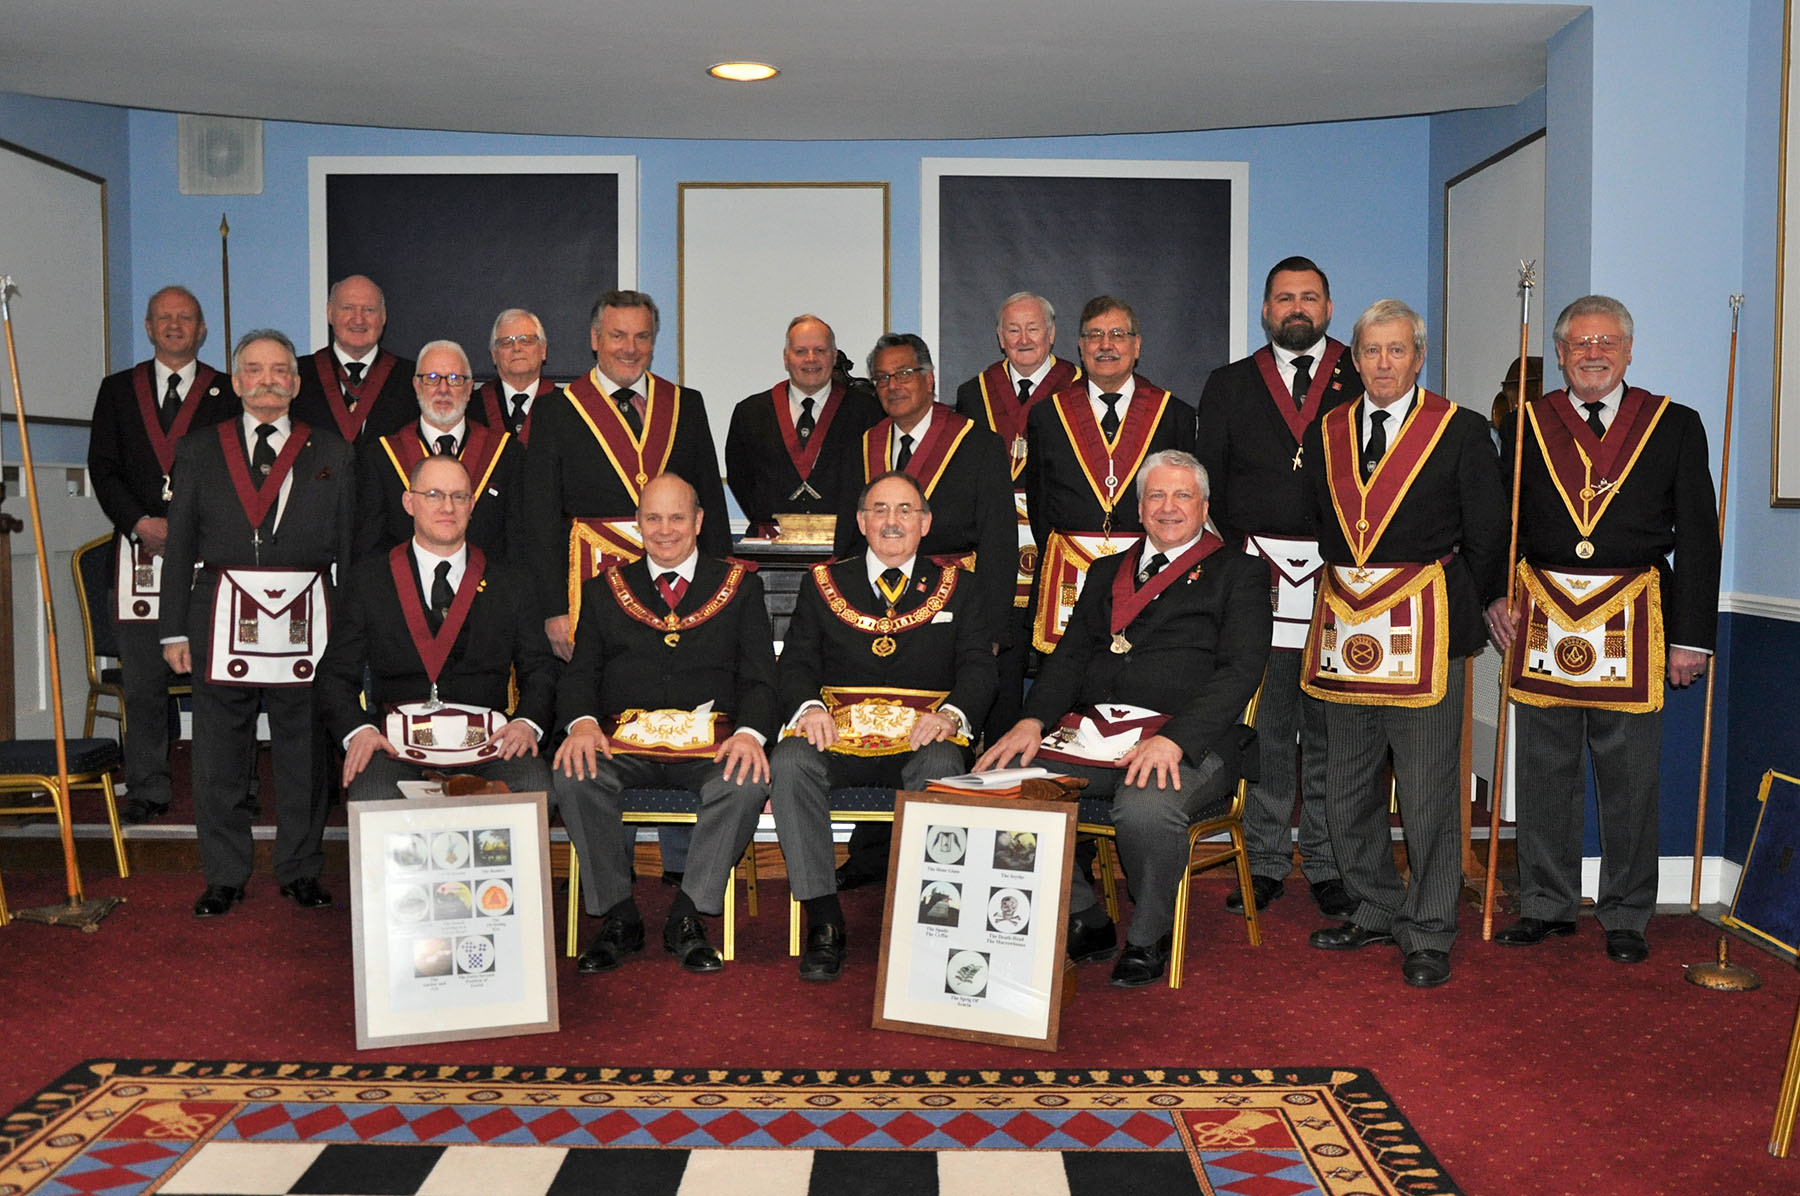 The Installation Meeting of The Court of Sion Abbey